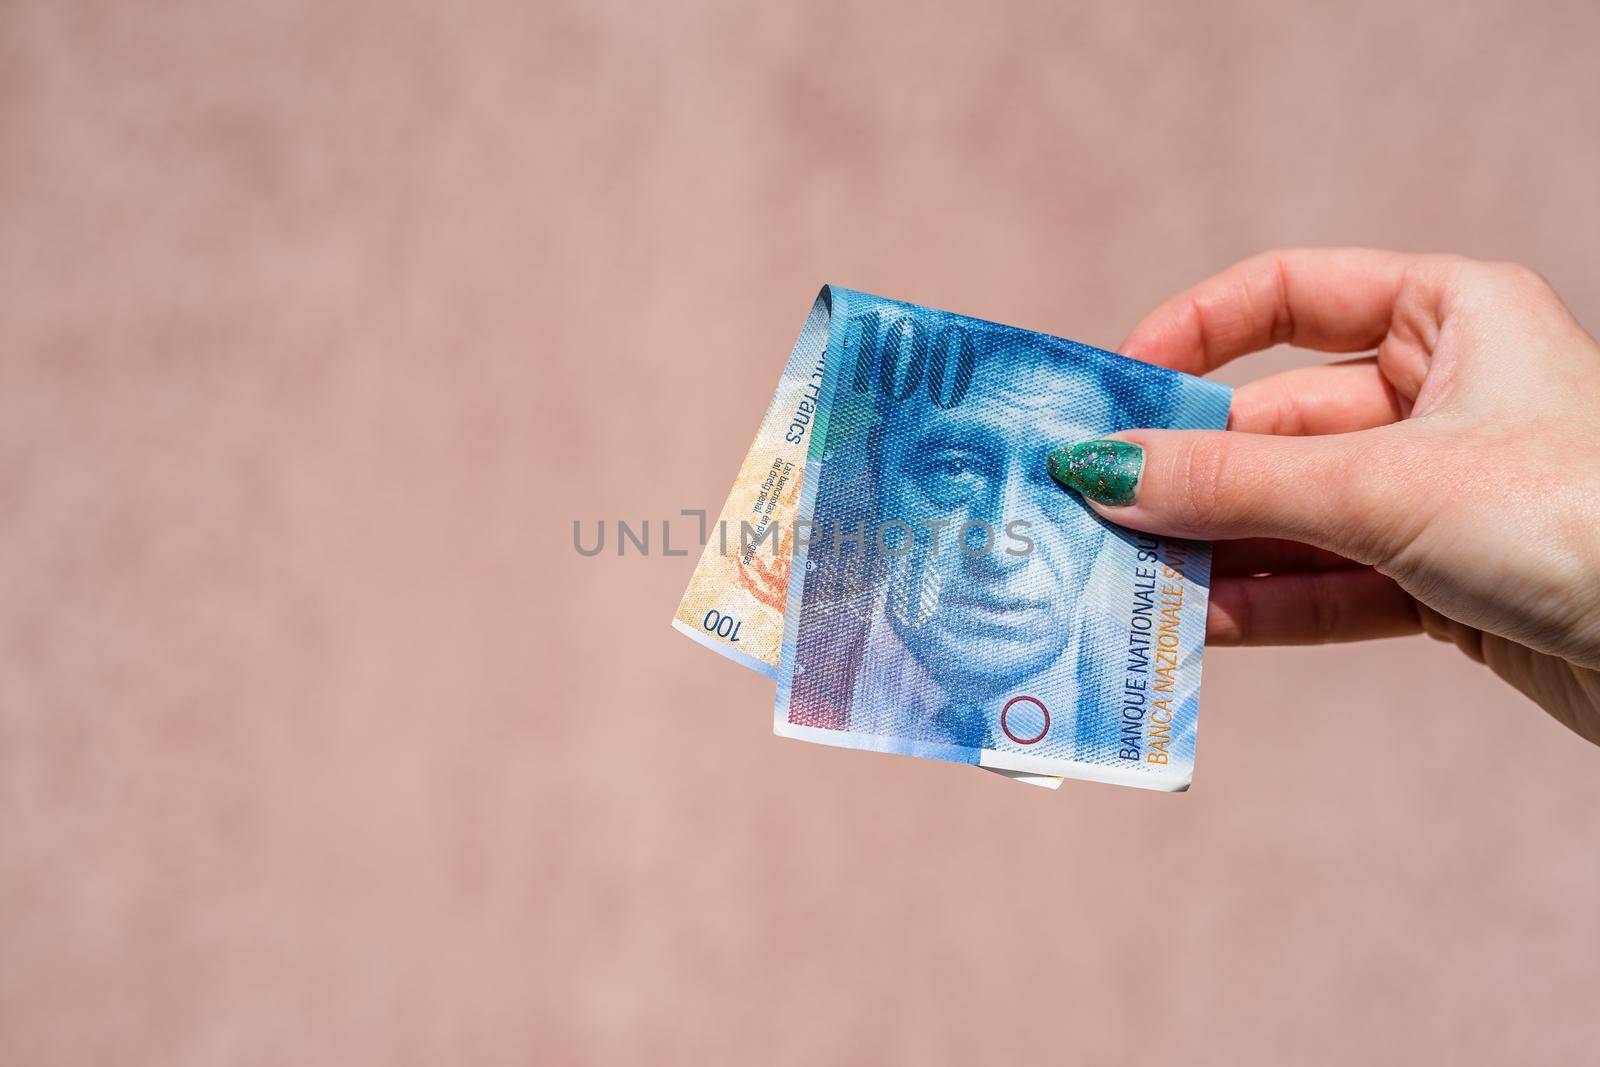 Hand holding showing euro money and giving or receiving money like tips, salary. 100 swiss franc banknotes CHF currency isolated. Concept of rich business people, saving or spending money.